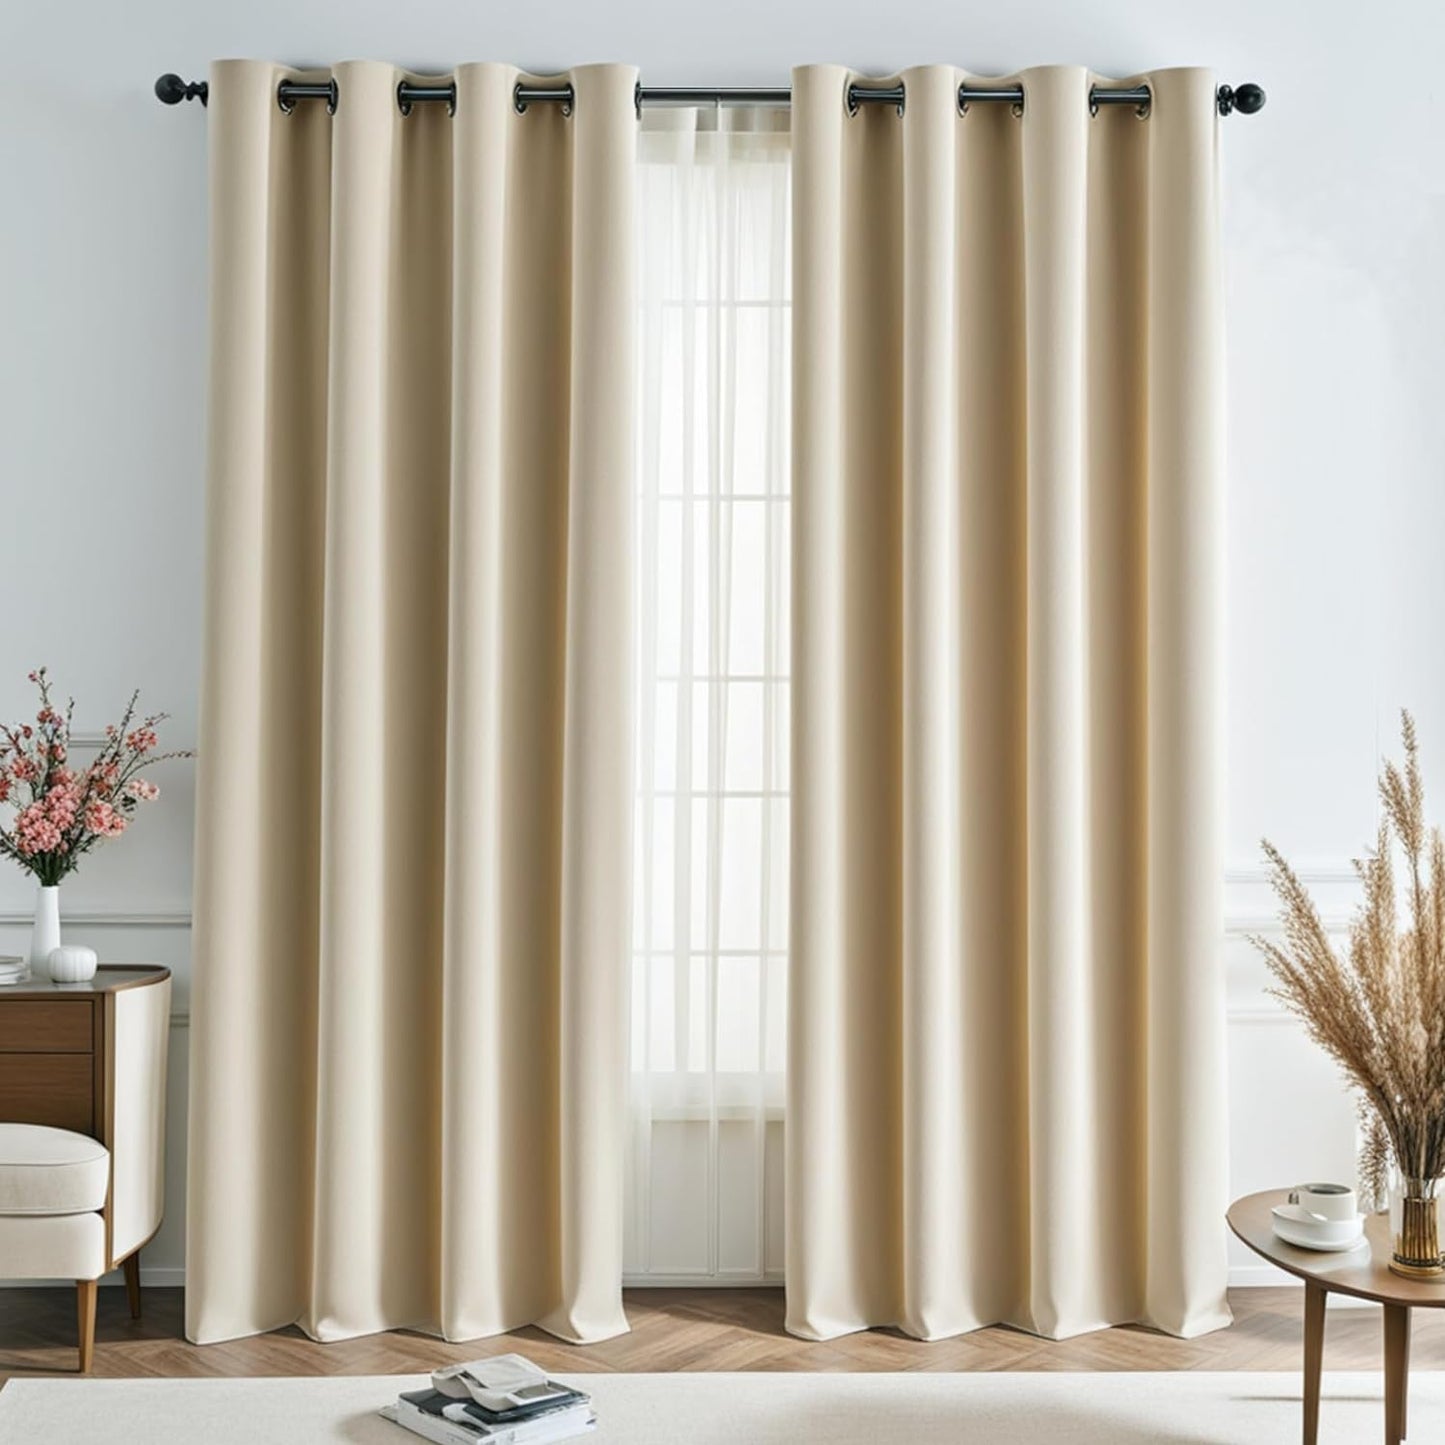 Lazzzy Velvet Blackout Curtains Brown Thermal Insulated Curtains 84 Room Darkening Window Drapes Super Soft Luxury Curtains for Living Room Bedroom Rod Pocket 2 Panels 84 Inch Long Gold Brown  TOPICK *Grommet | Beige W52 X L96 